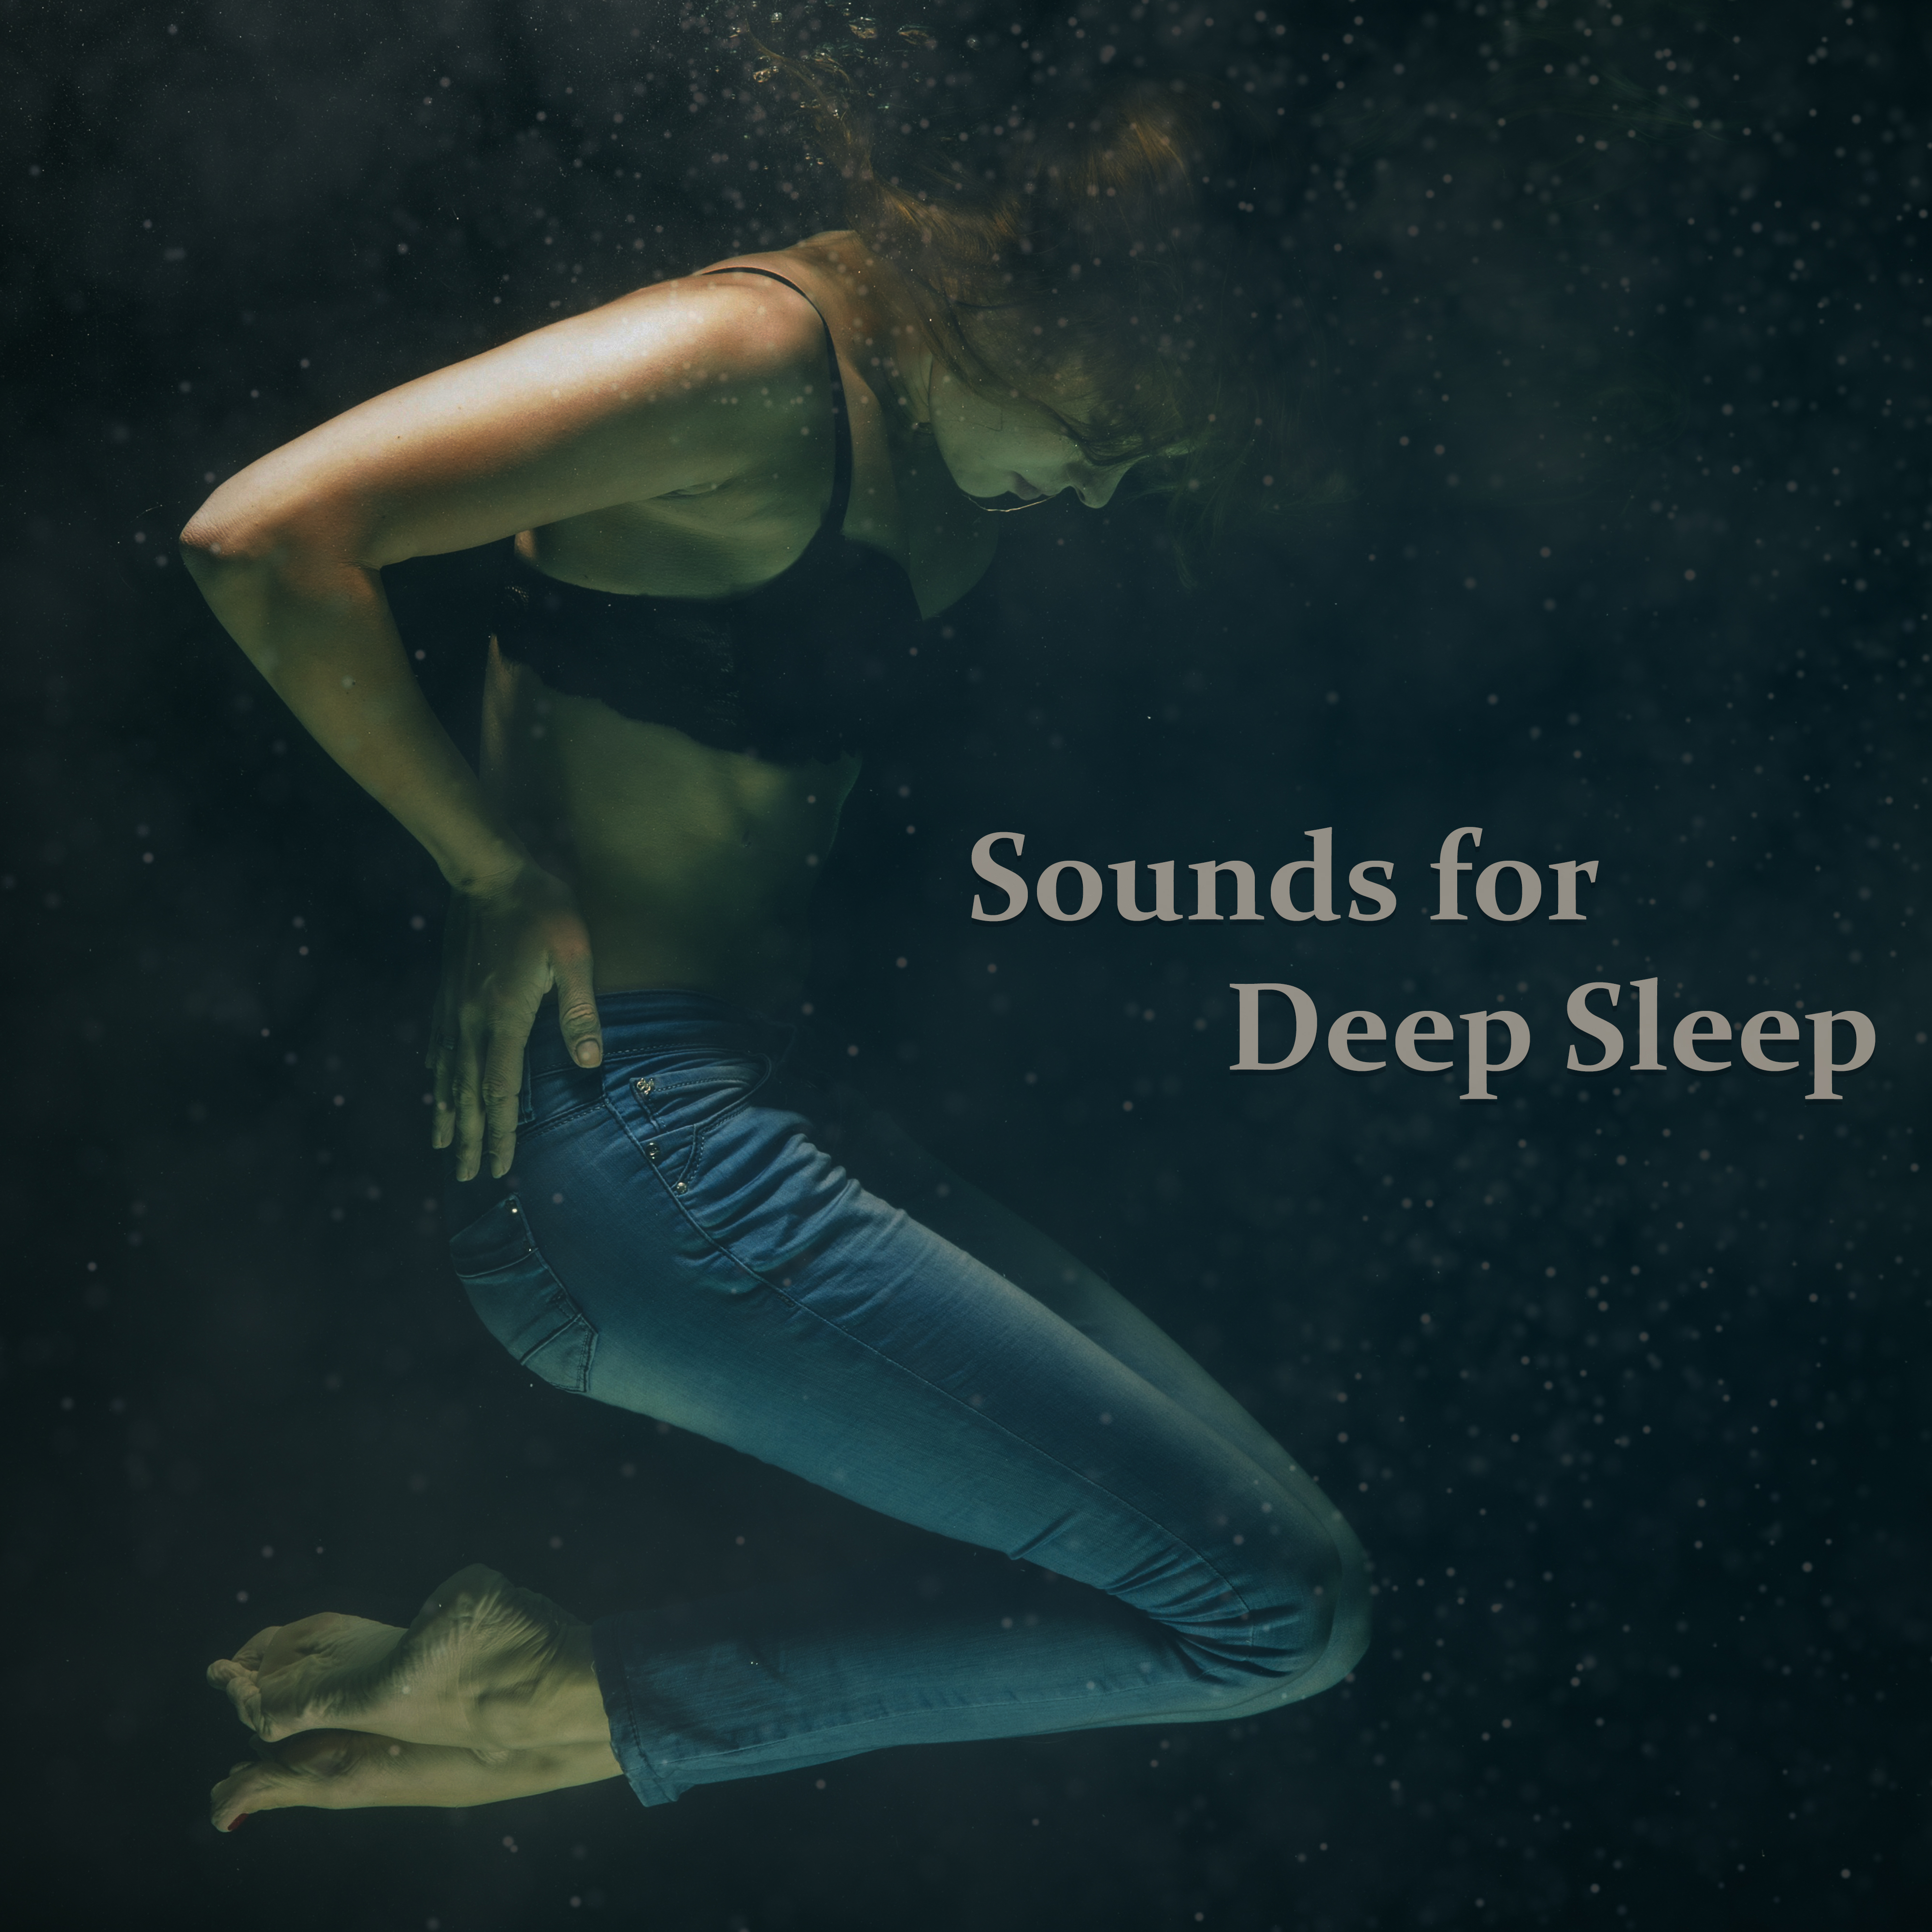 Sounds for Deep Sleep  Sleep Well, Dreaming All Night, New Age for Relaxation, Rest a Bit